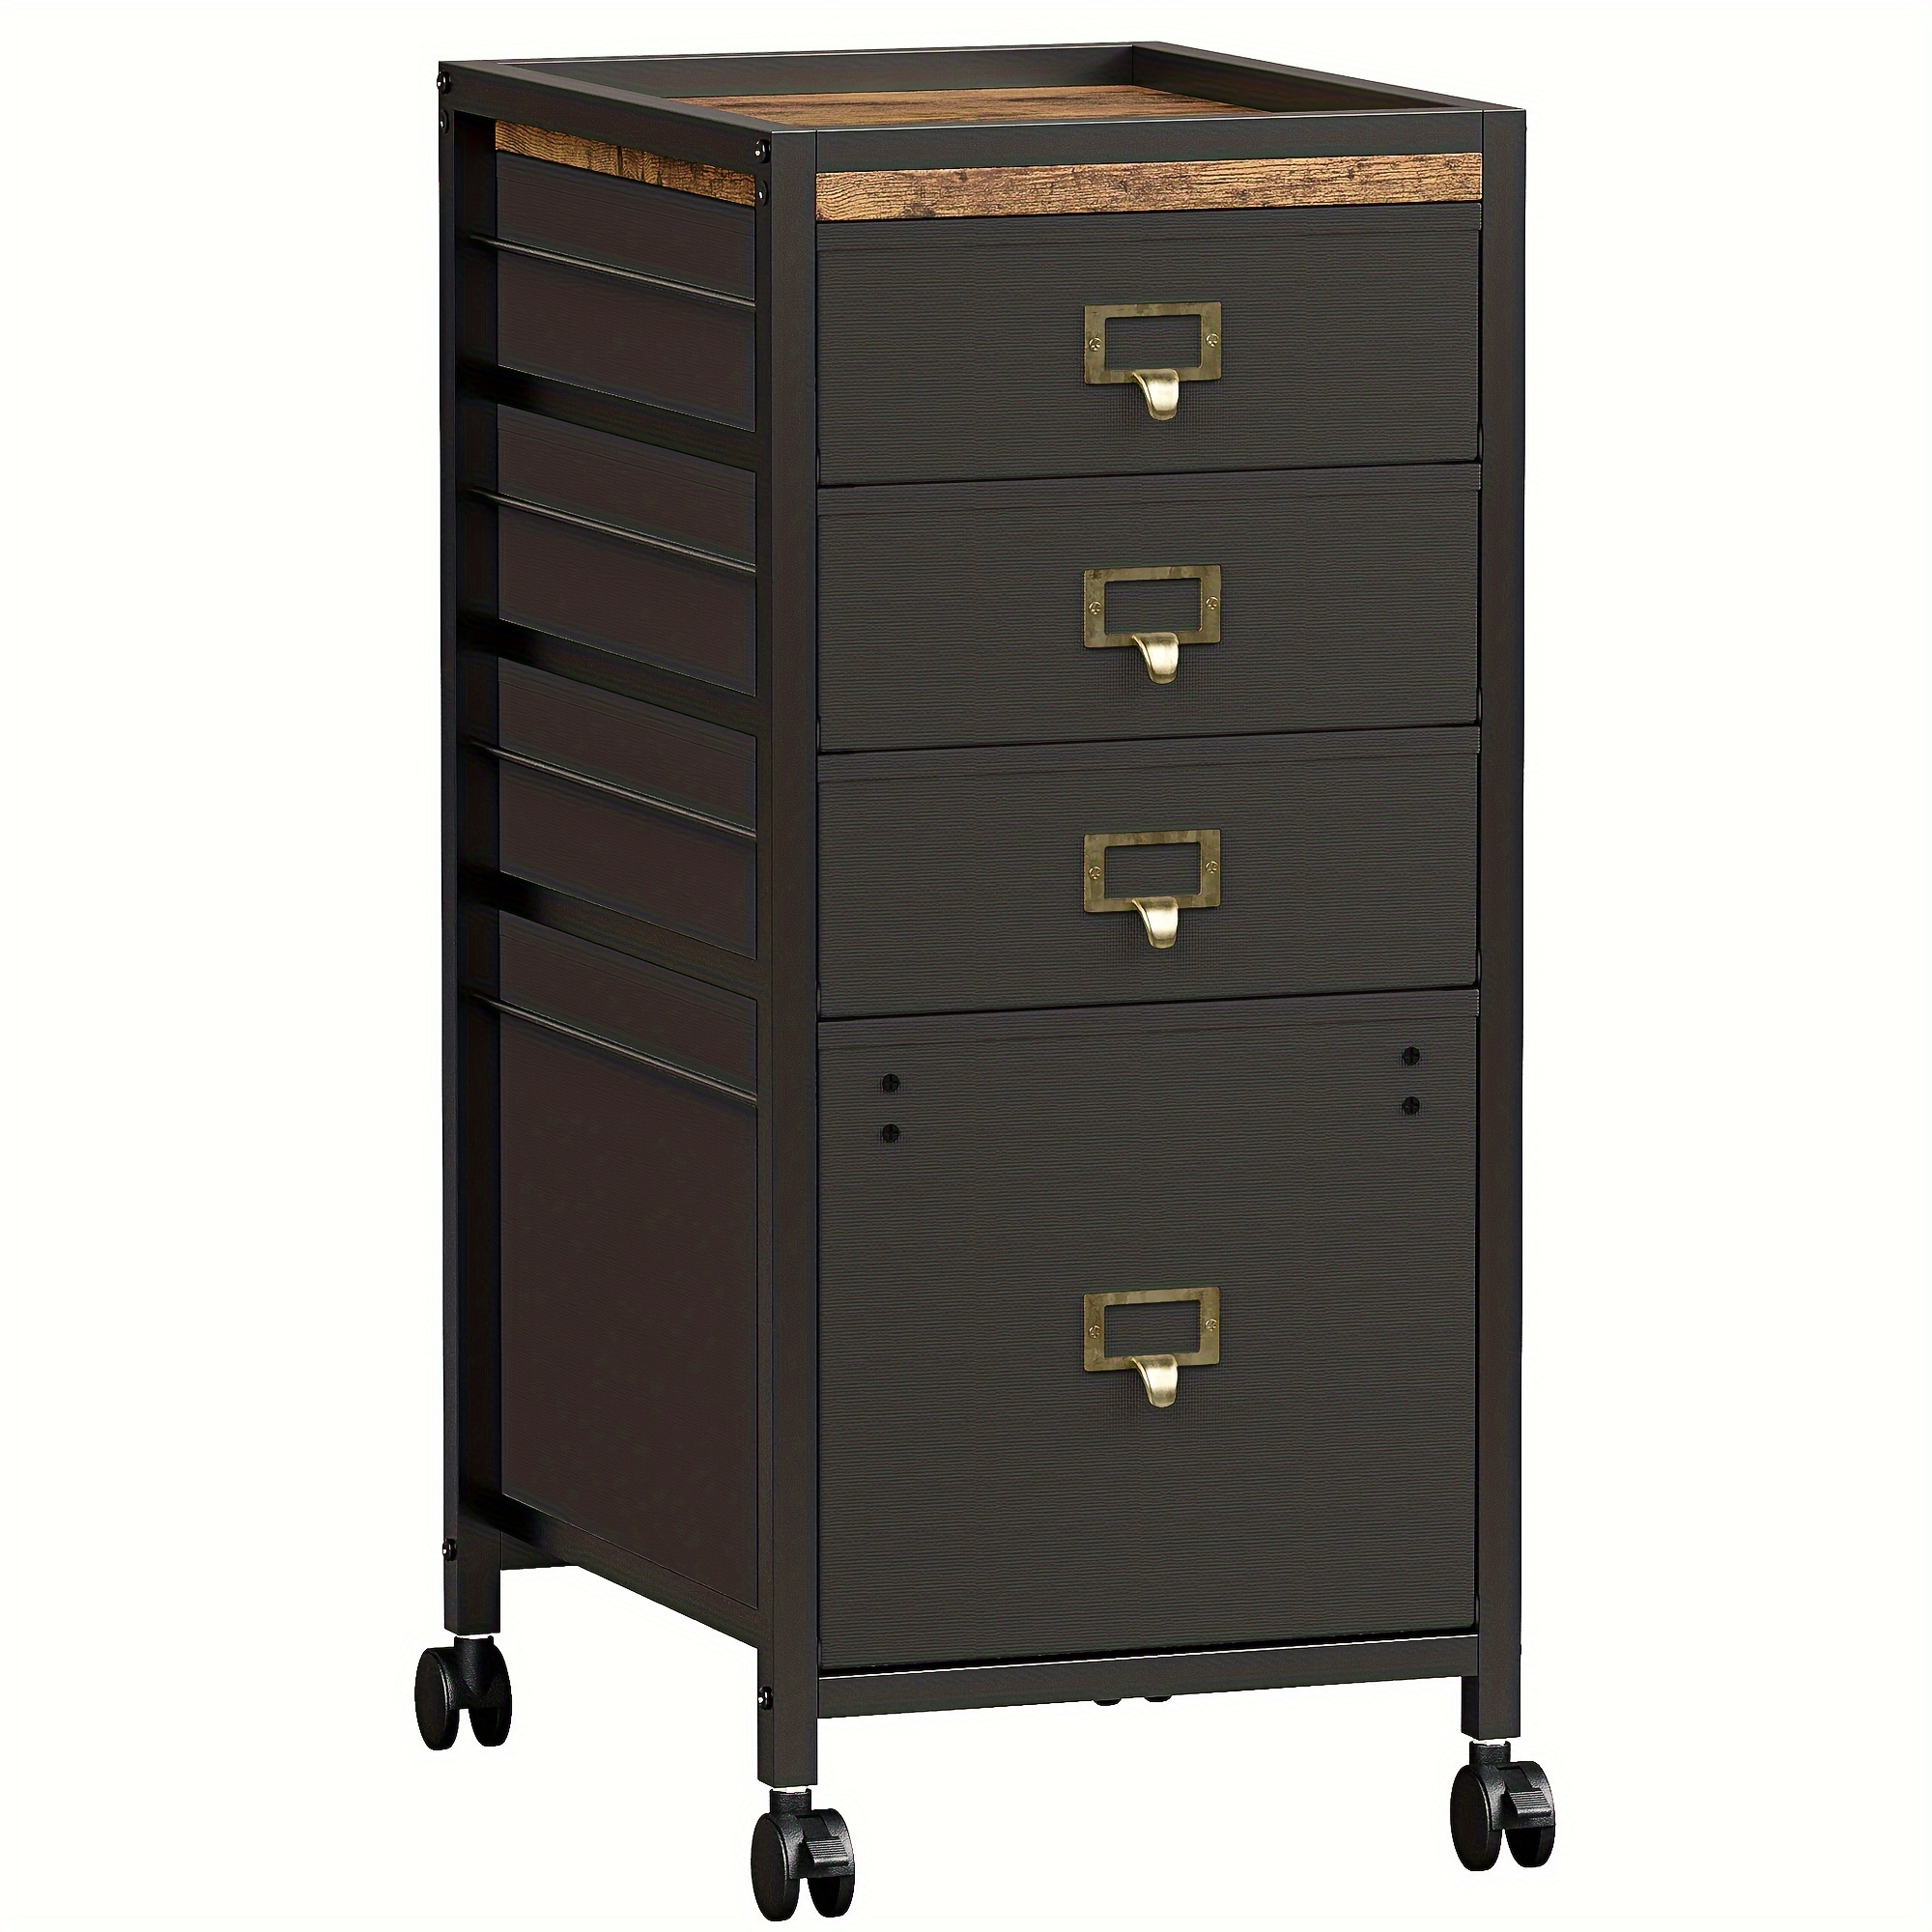 

File Cabinet With 4 Drawers, Home Office Mobile File Cabinet, Fabric Vertical File Cabinet With Wheels, Fits A4 Or Letter Size Printer Stand